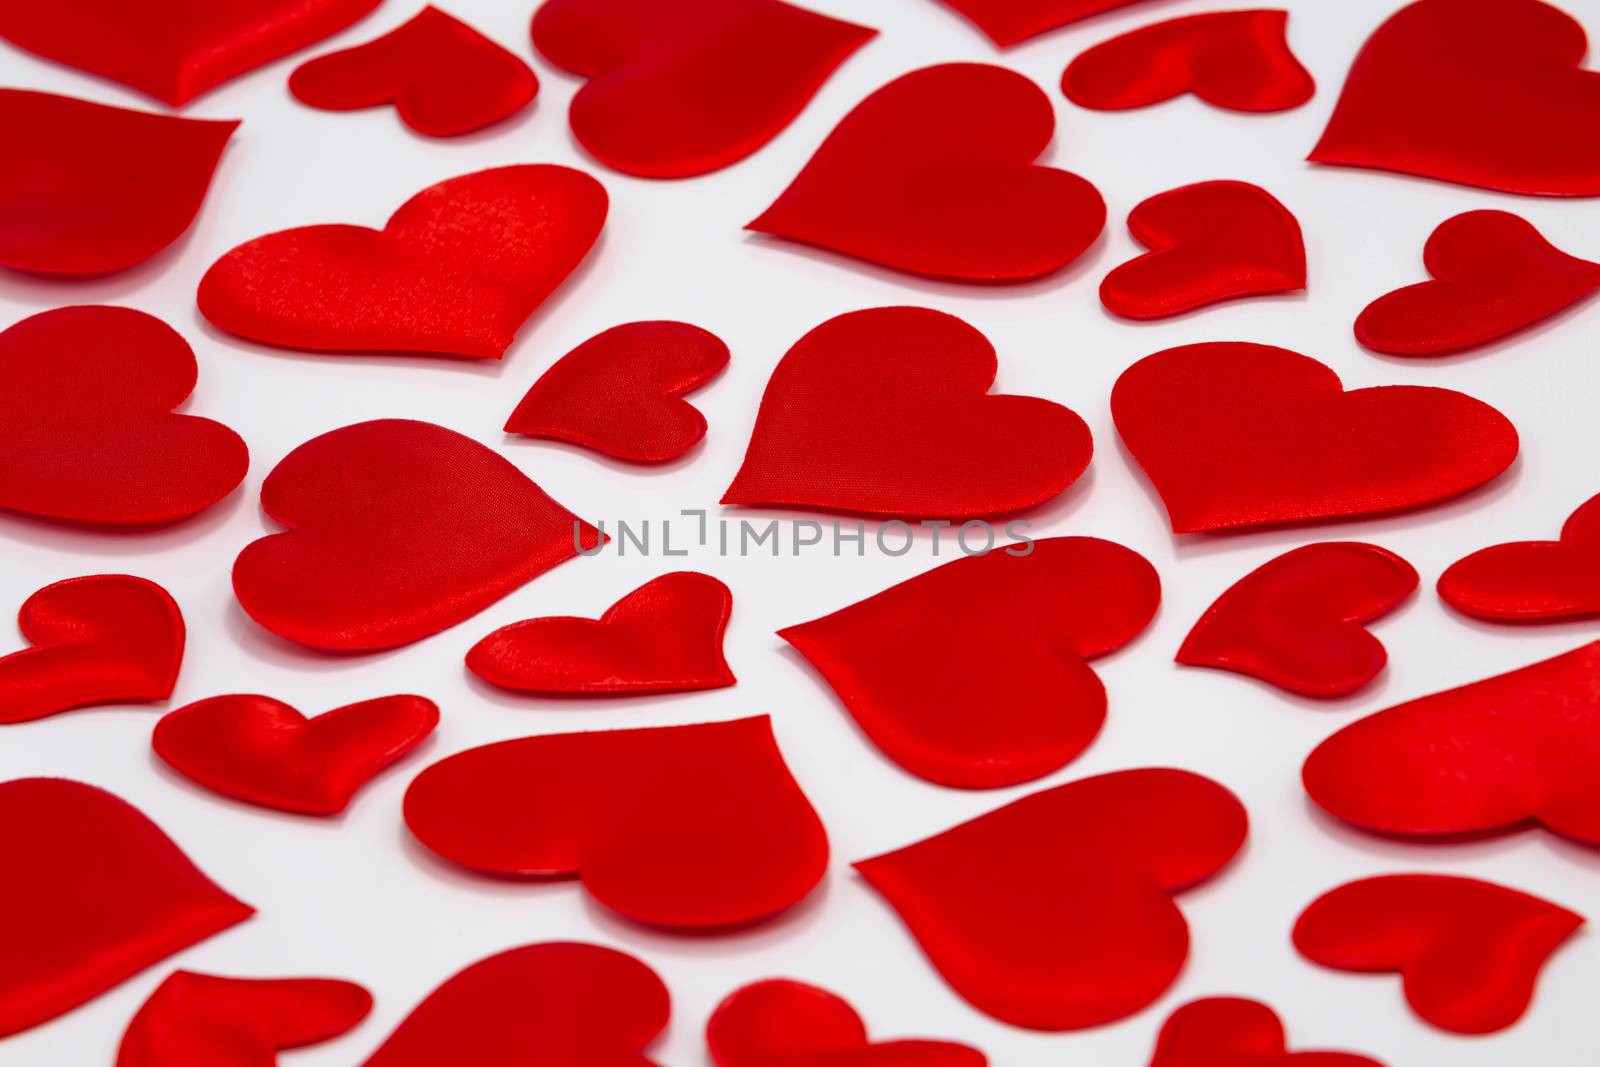 Top View of Scattered Red Hearts on White Background. Valentine’s Day Theme. Symbol of Love and Friendship